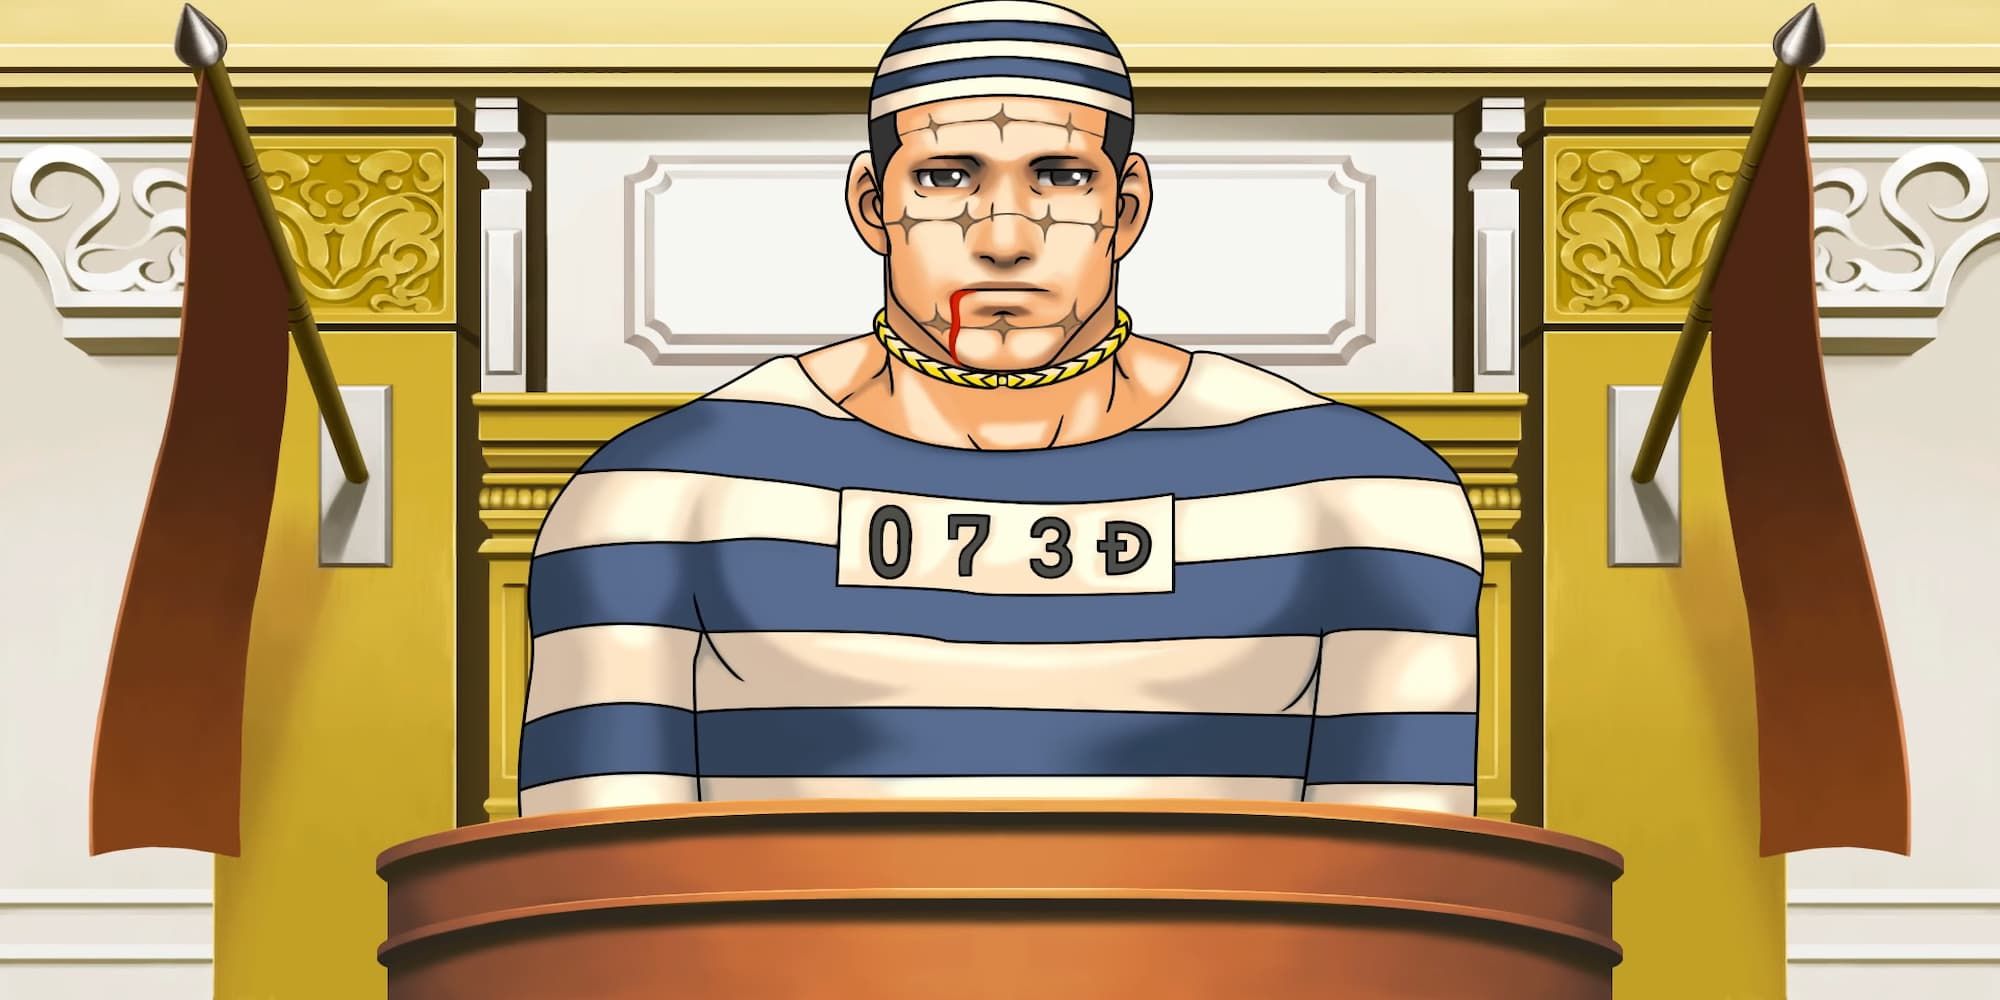 Ace Attorney Fawles breakdown at witness stand in court wearing blue and white striped prison shirt and cap staring straight at camera line of blood trailing down side of mouth